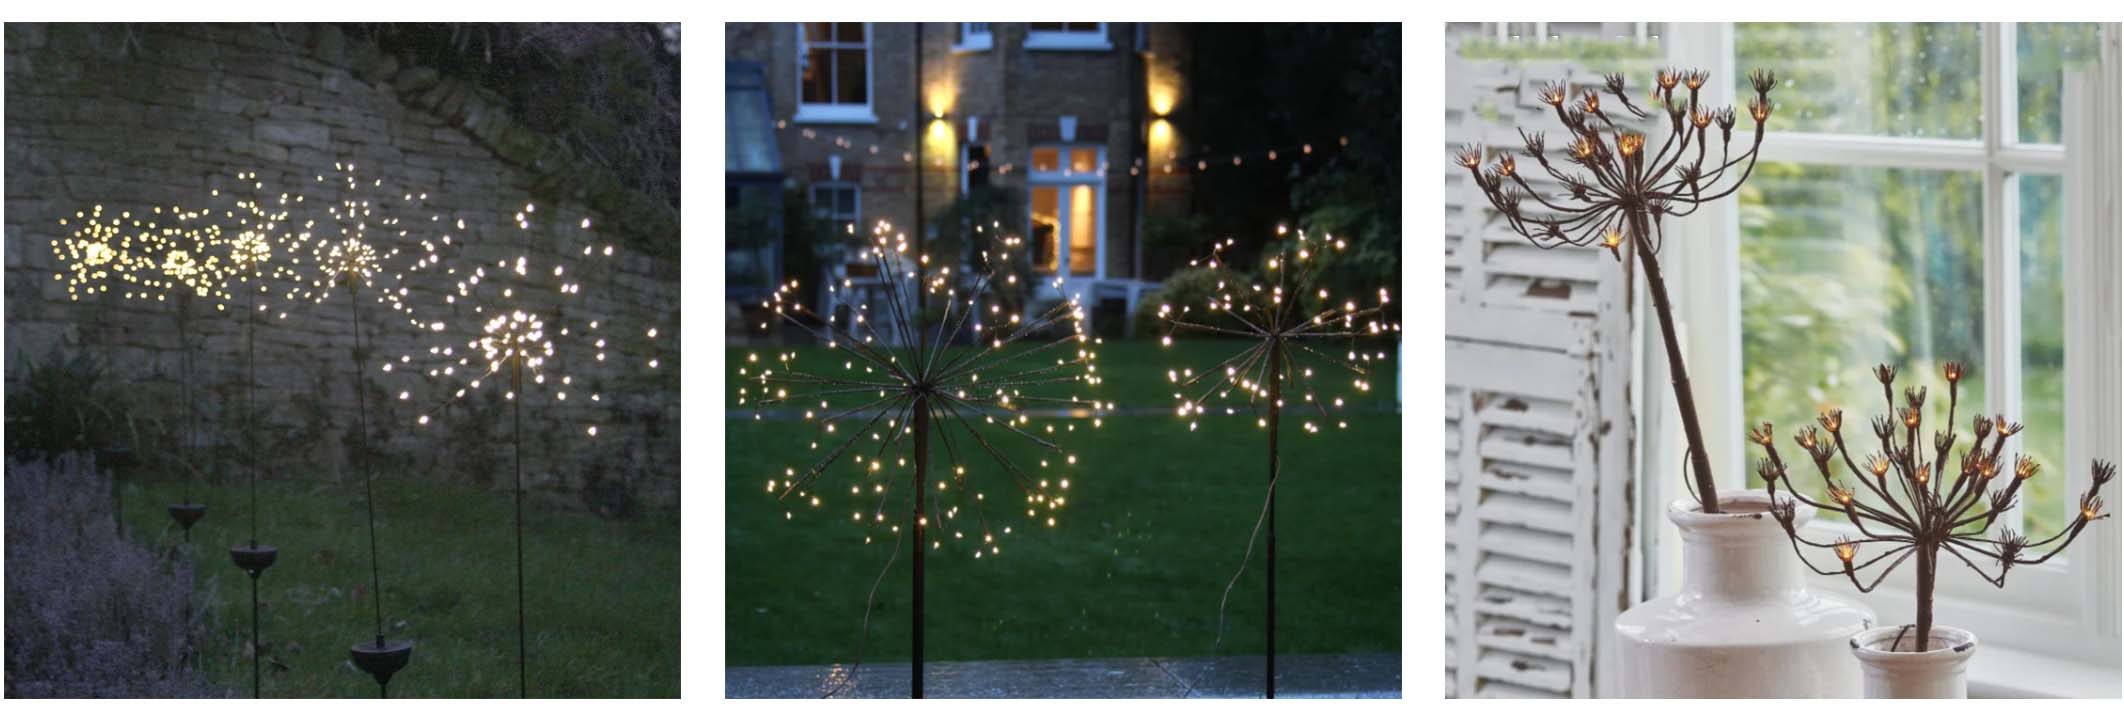 Solar stake lights for the garden in various designs including fennel and dandelion styles